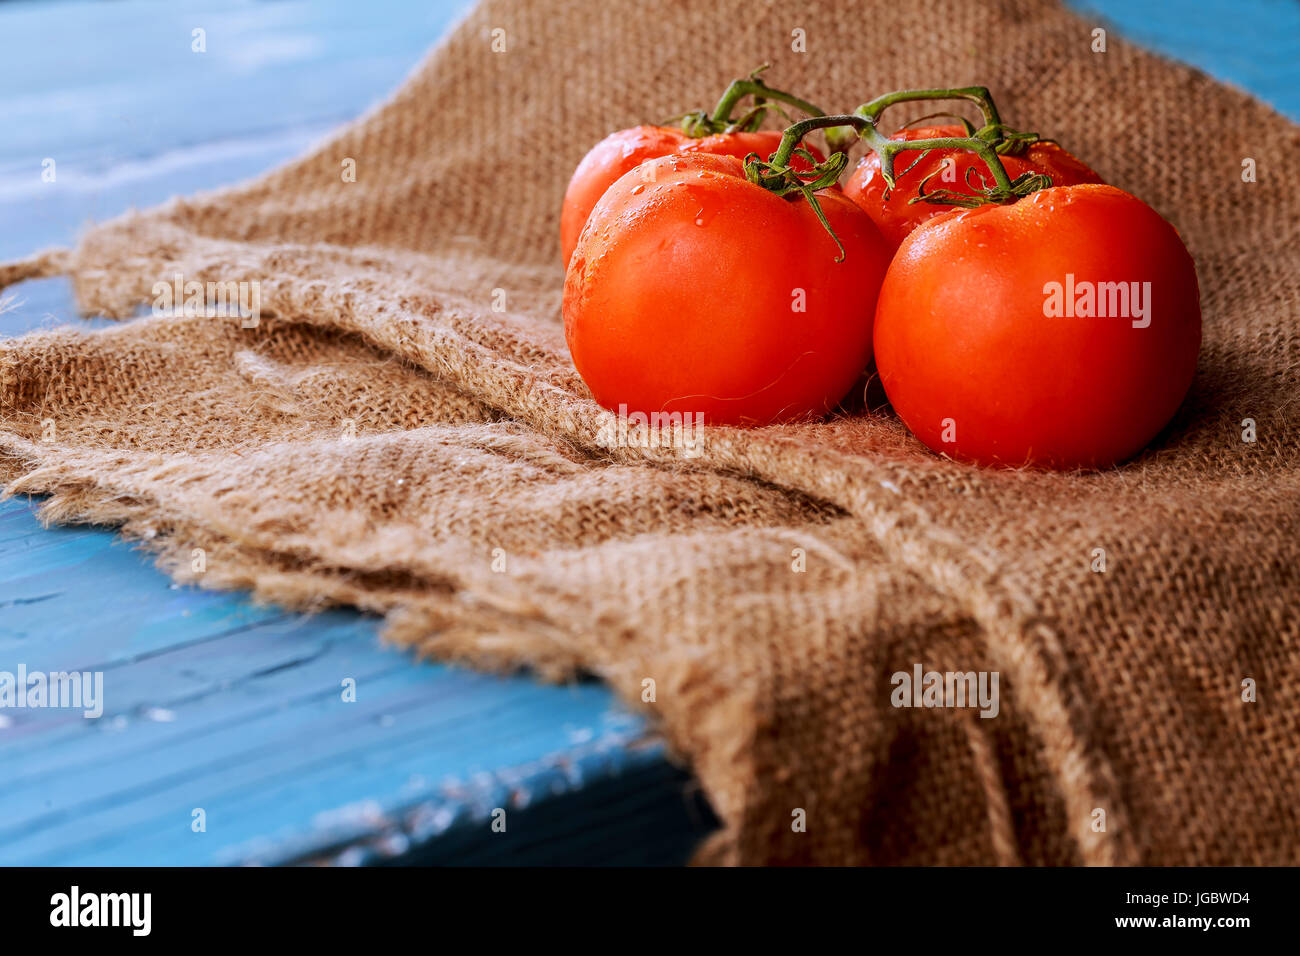 Tomatoes on vine with clipping path on cutting board , blue vintage wooden background, healthy lifestyle, cooking and market concept Stock Photo